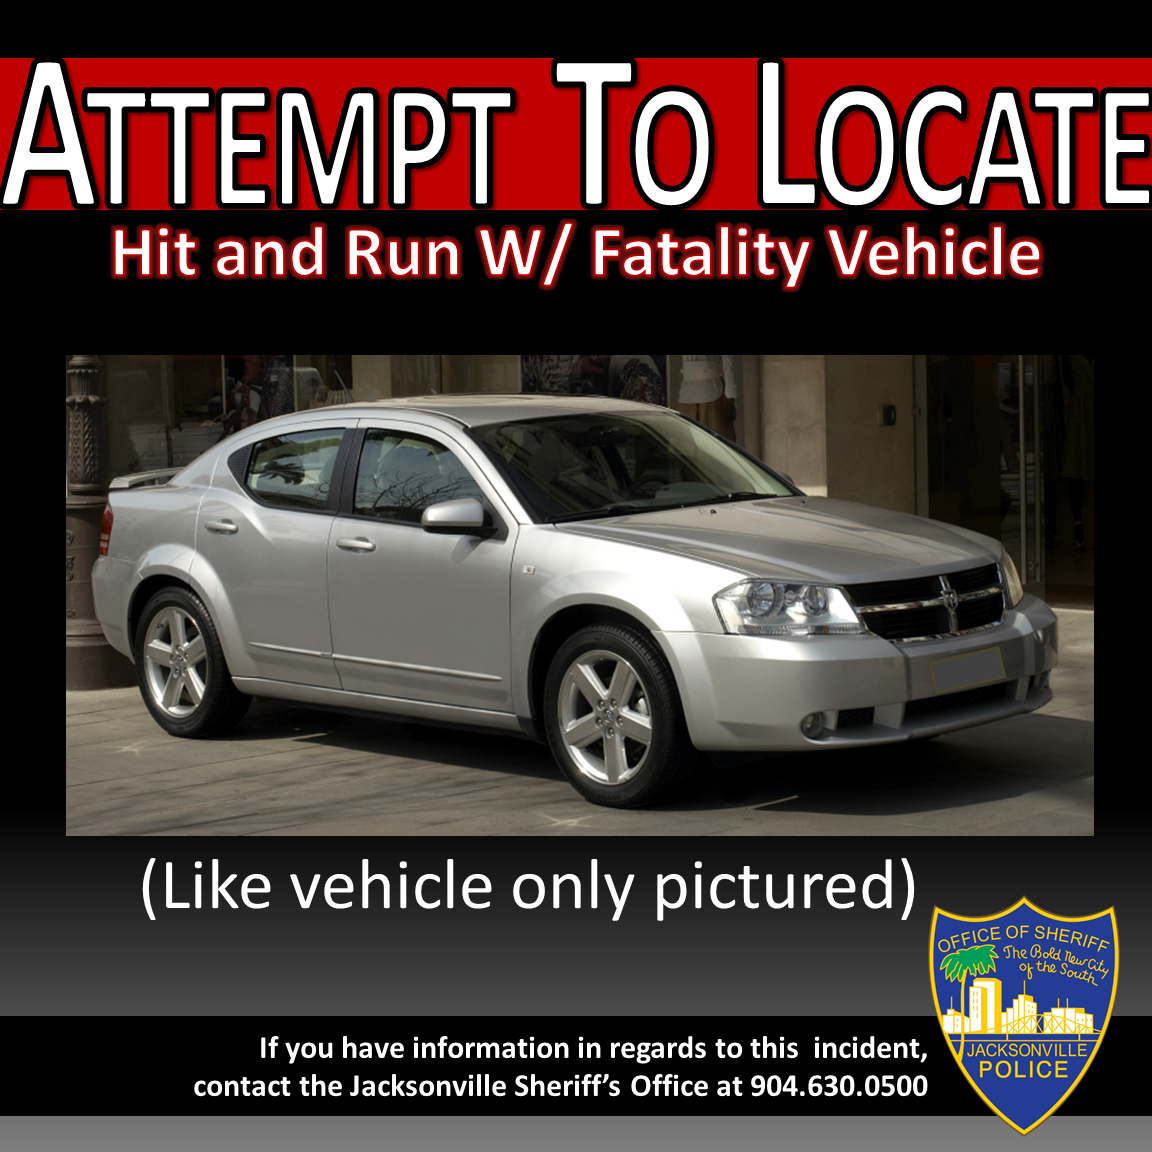 Car sought by police in hit-and-run crash that killed woman on Lane Avenue